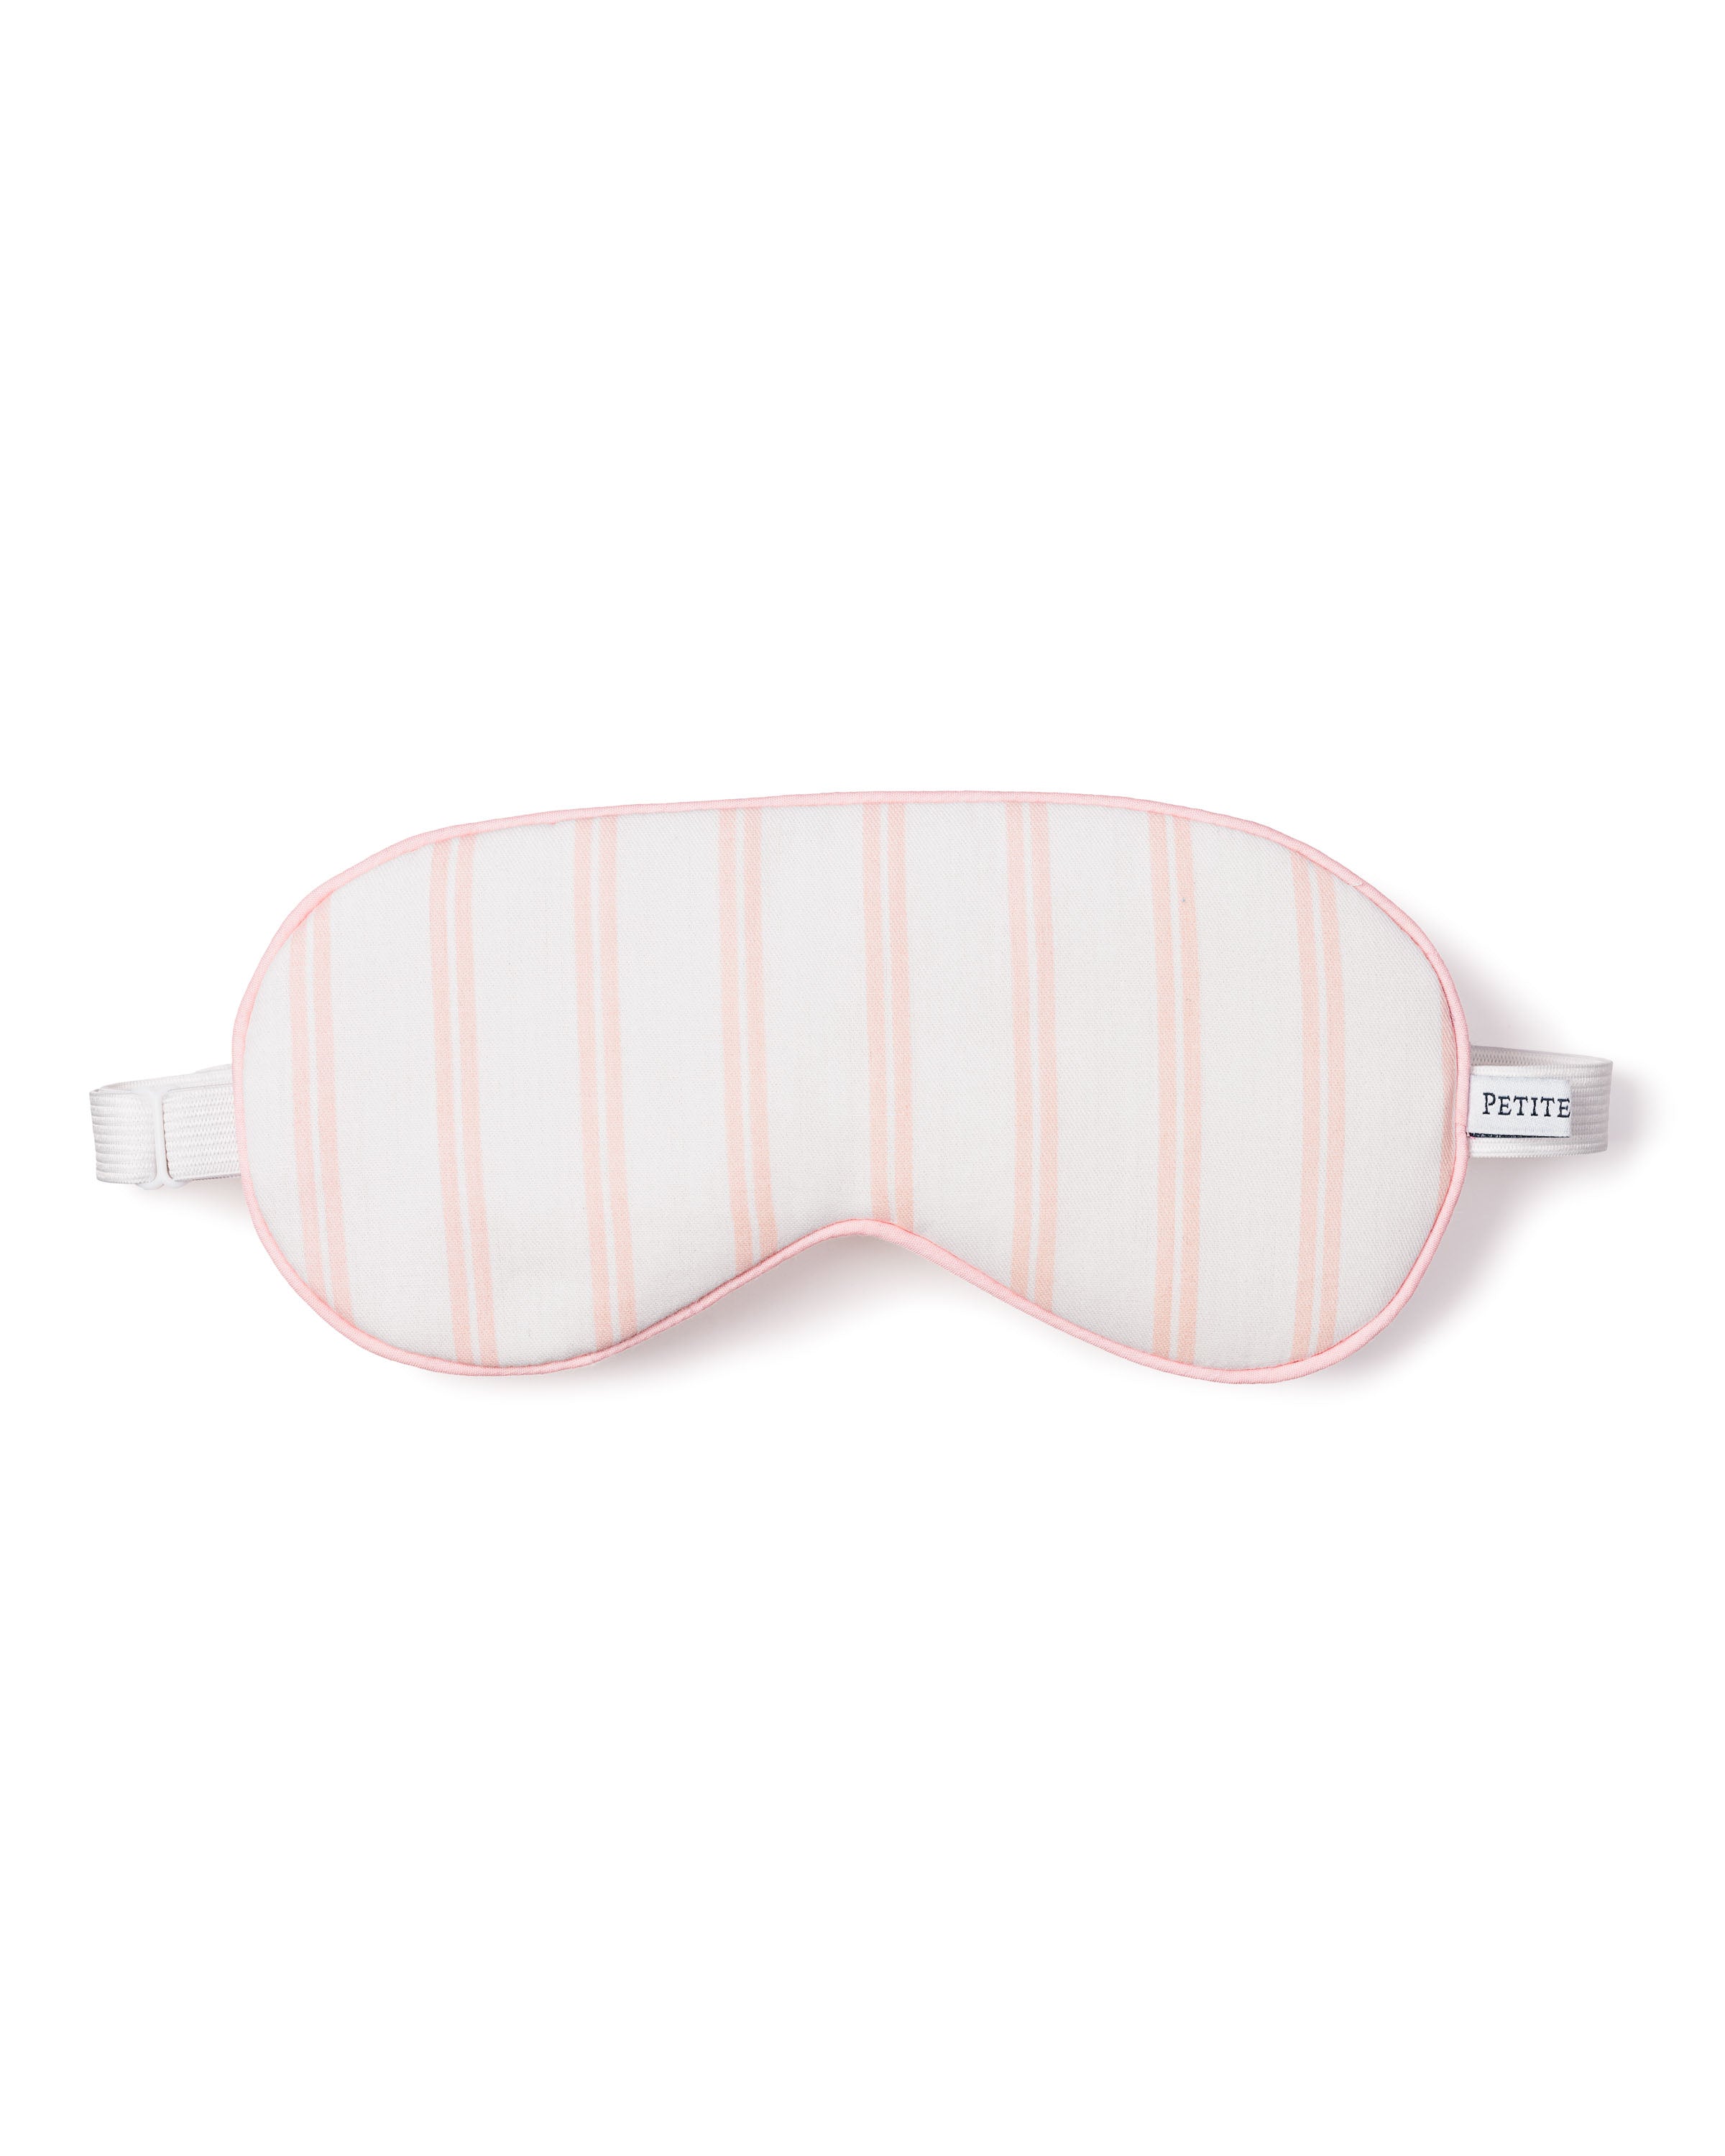 Kid's Sleep Mask in Pink and White Stripe